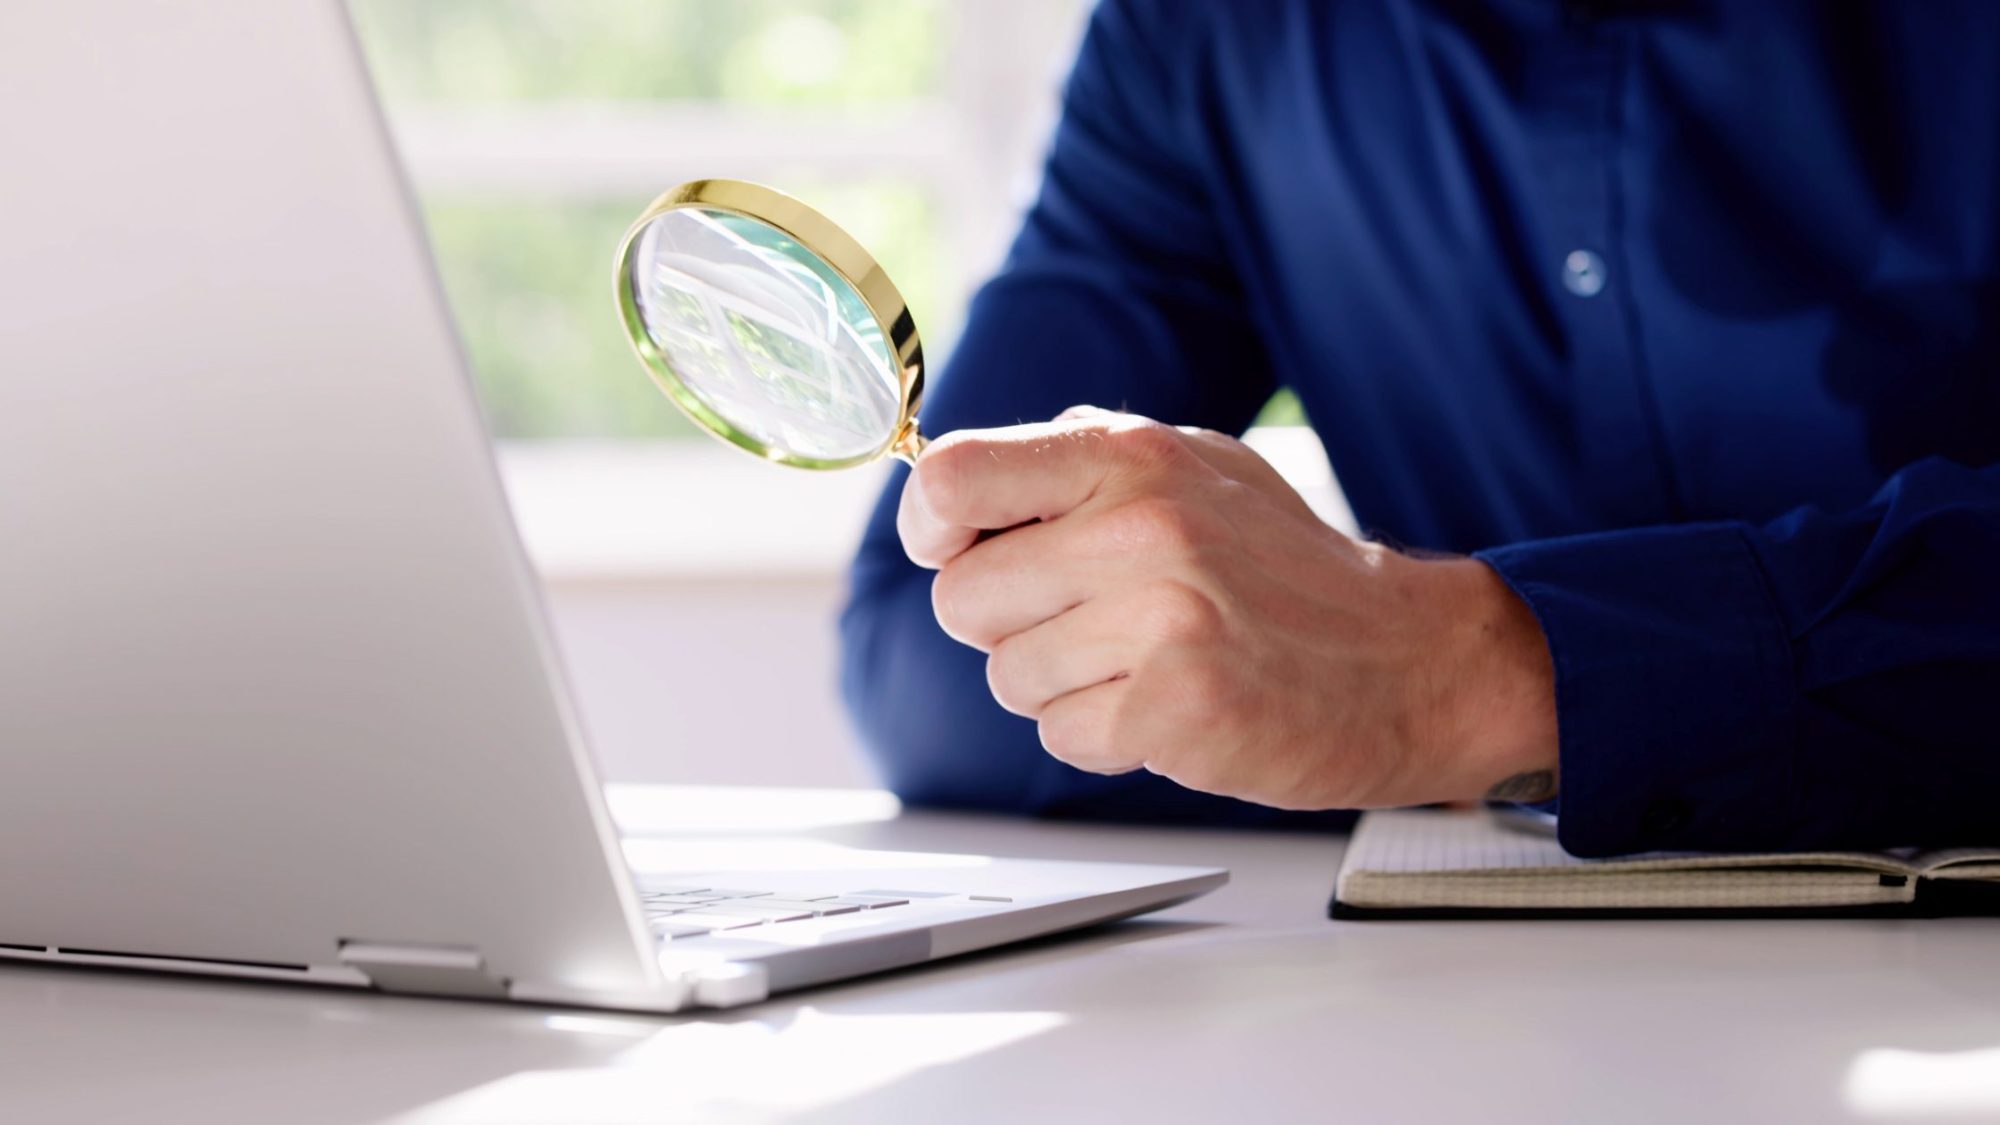 A person in a blue shirt uses a magnifying glass to examine the screen of a laptop.